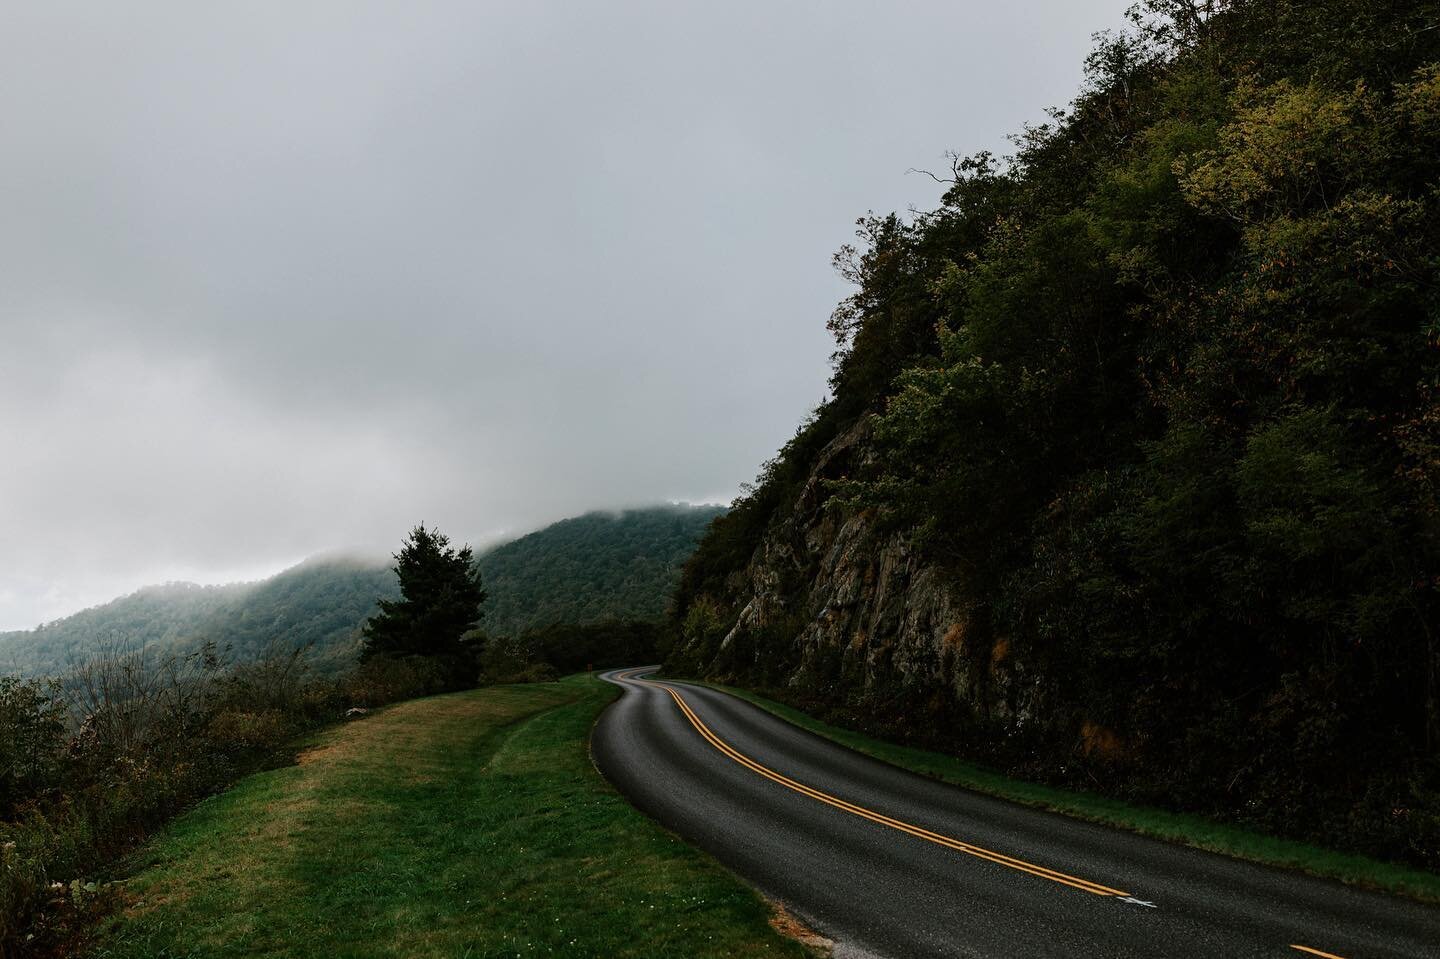 What would you be listening to on a foggy drive through the mountains?! *plays anything by death cab or bon ivor every single time* drop your favorites so I can make a new rainy day mountain playlist 🌬✨